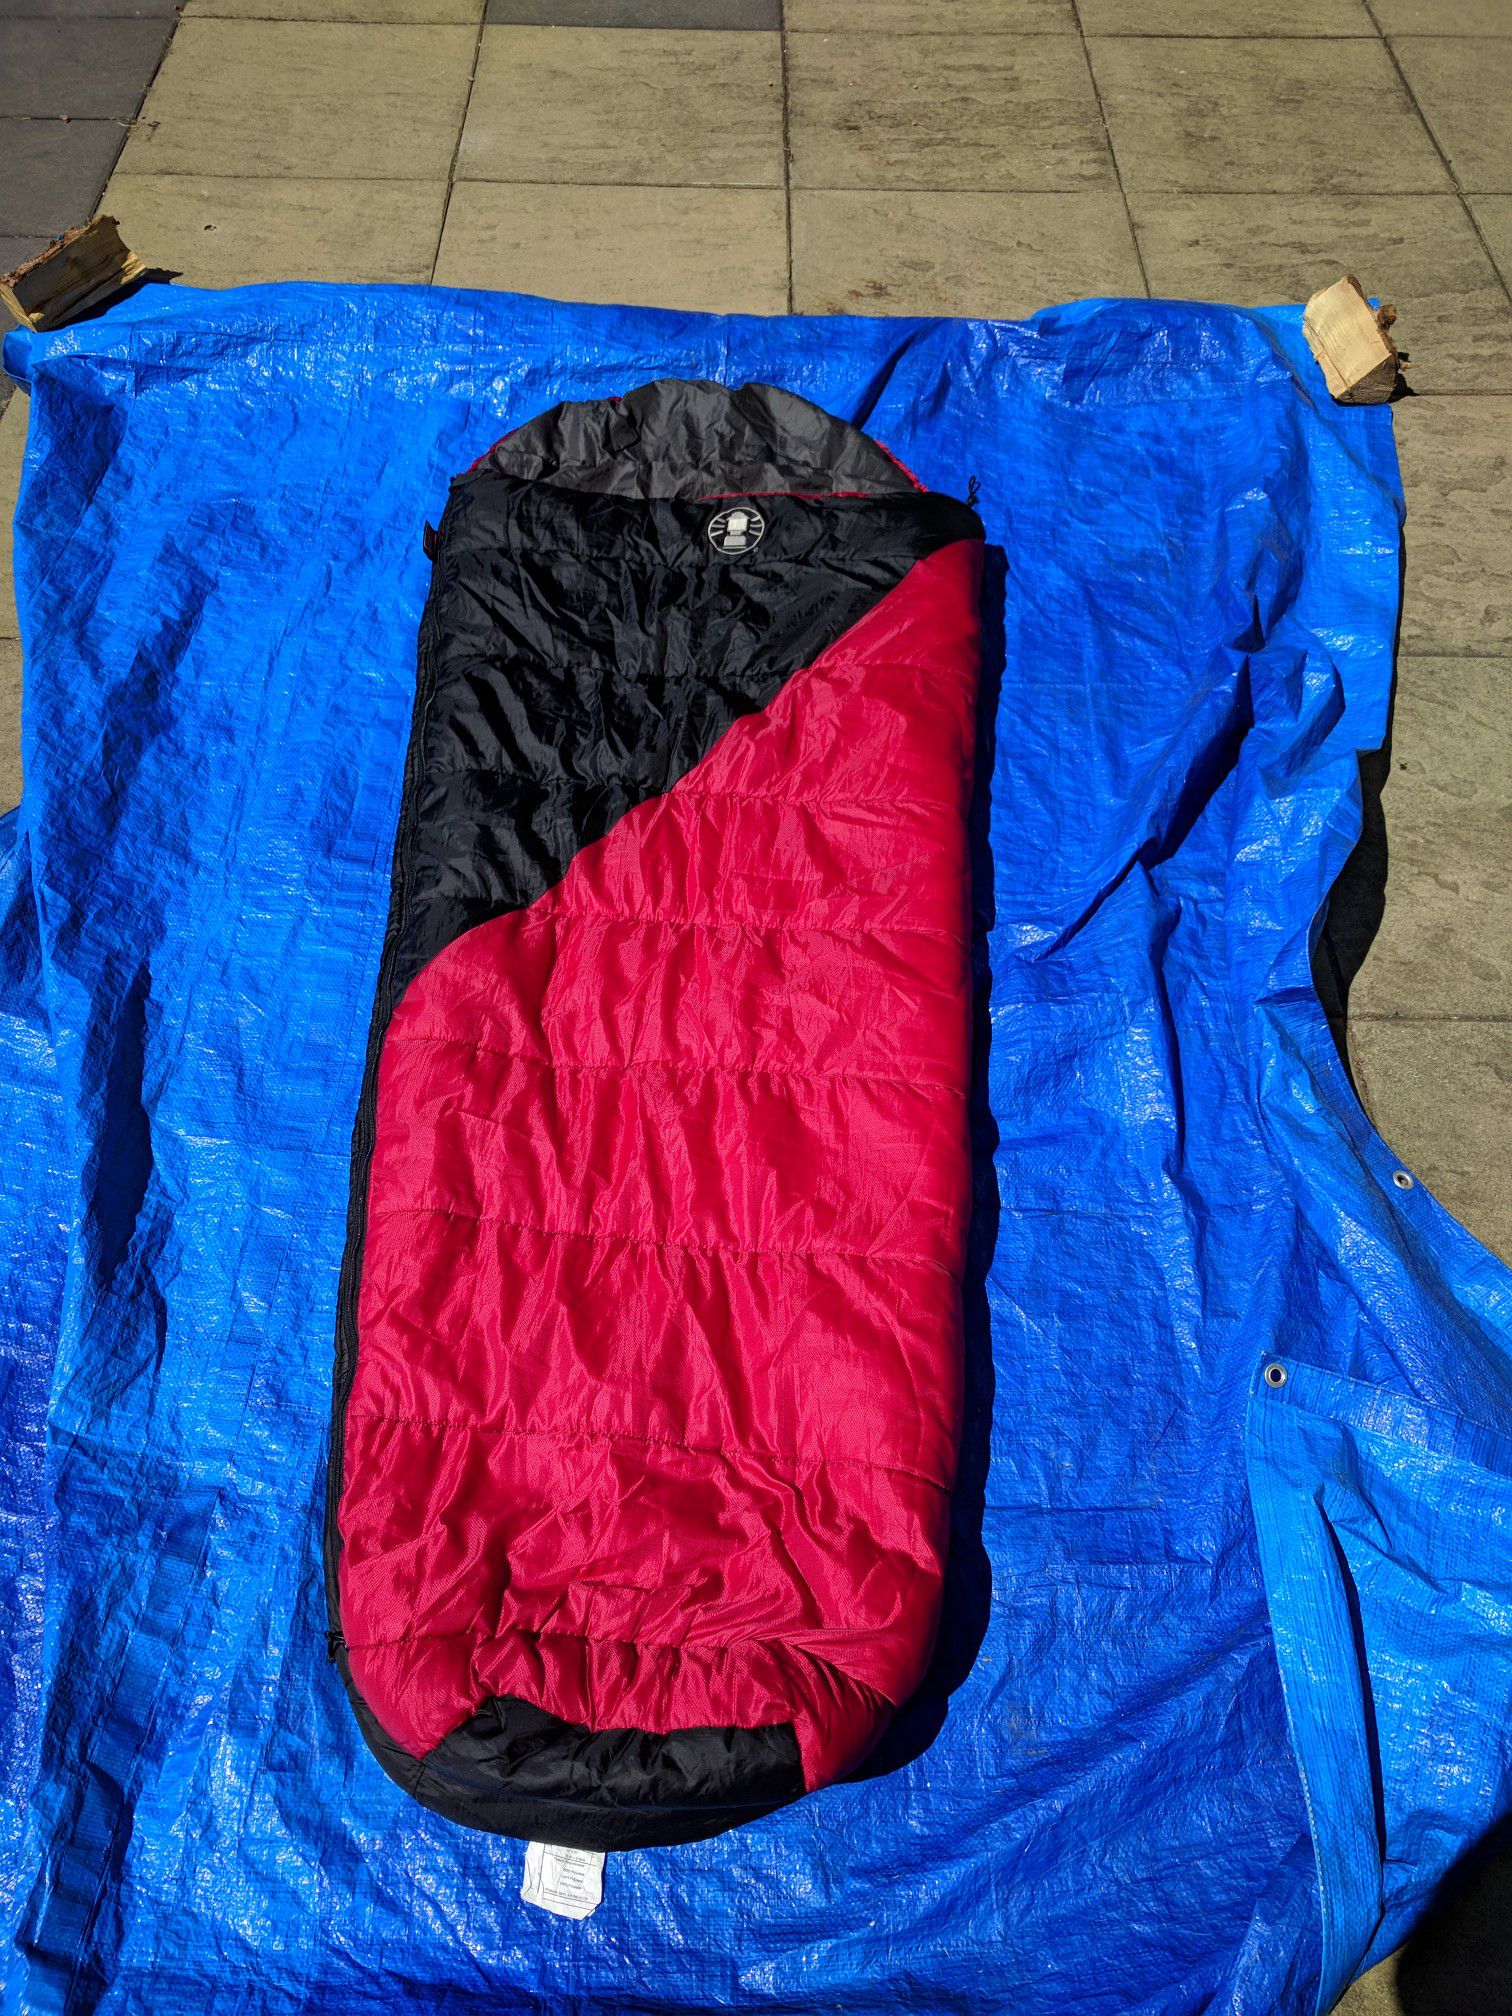 Coleman sleeping bag - mummy bag style, in good condition